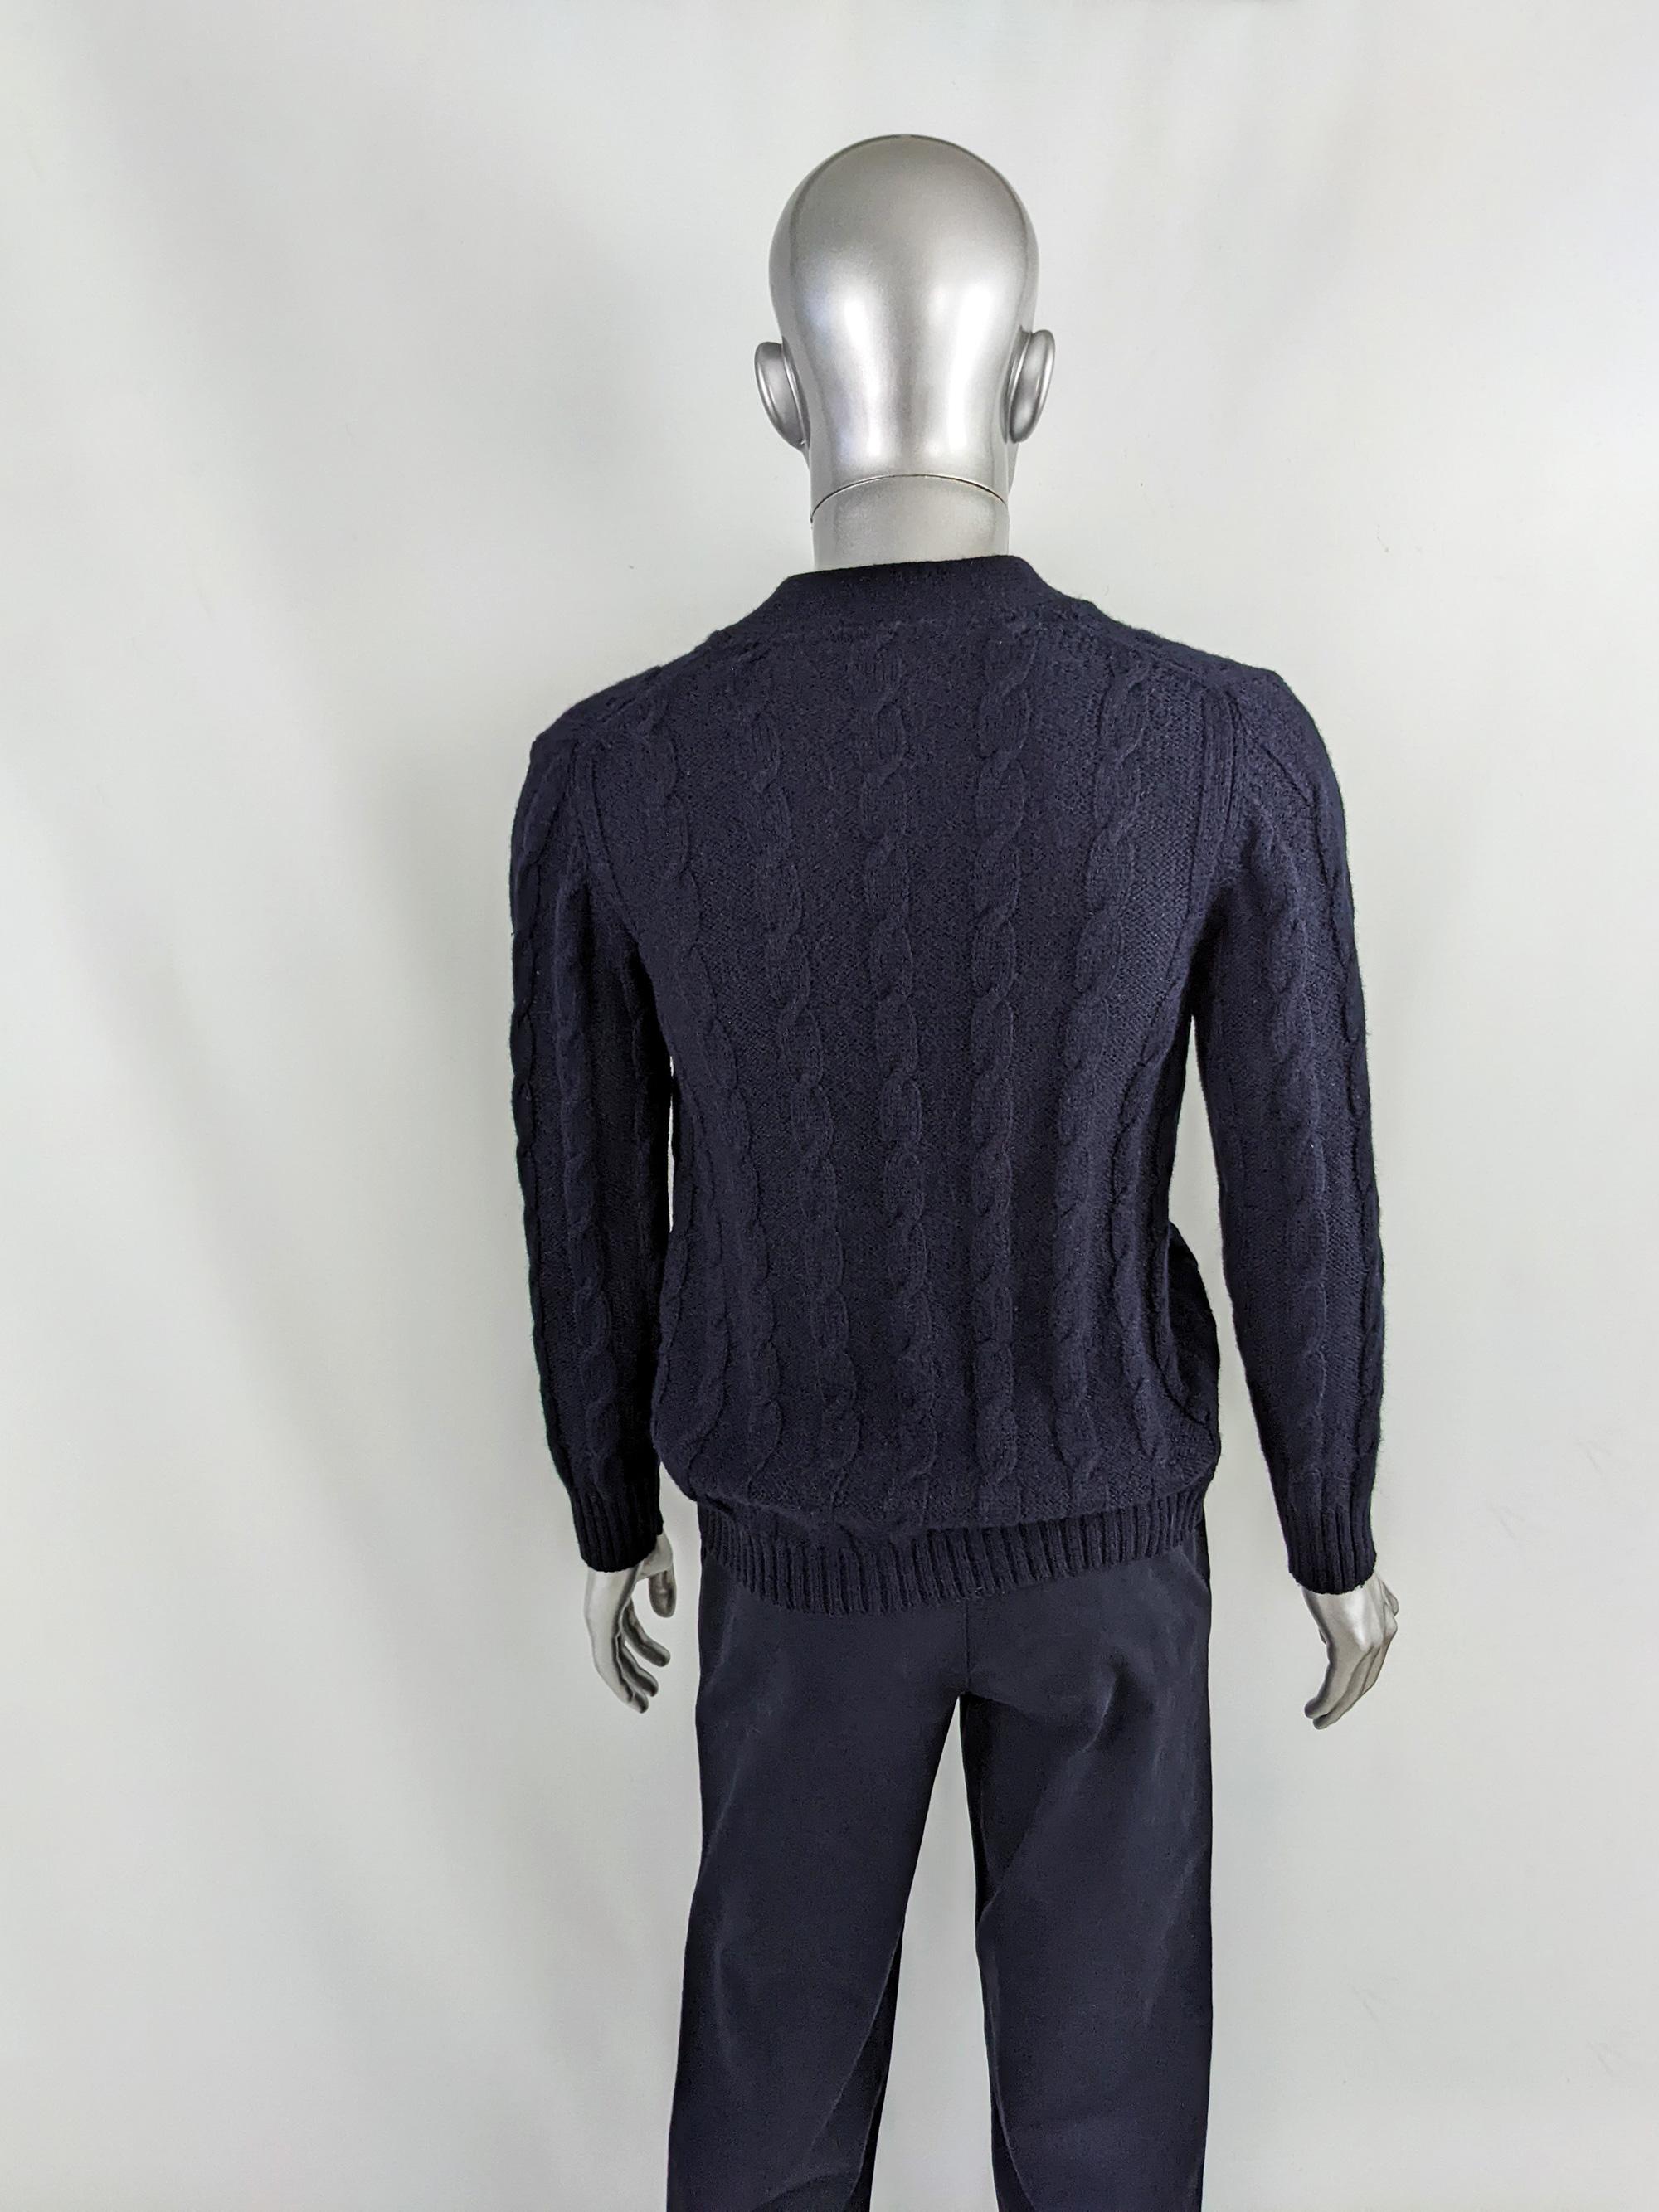 Emanuel Ungaro Mens Vintage Dark Blue Wool Cable Knit Cardigan Sweater, 1980s In Excellent Condition In Doncaster, South Yorkshire